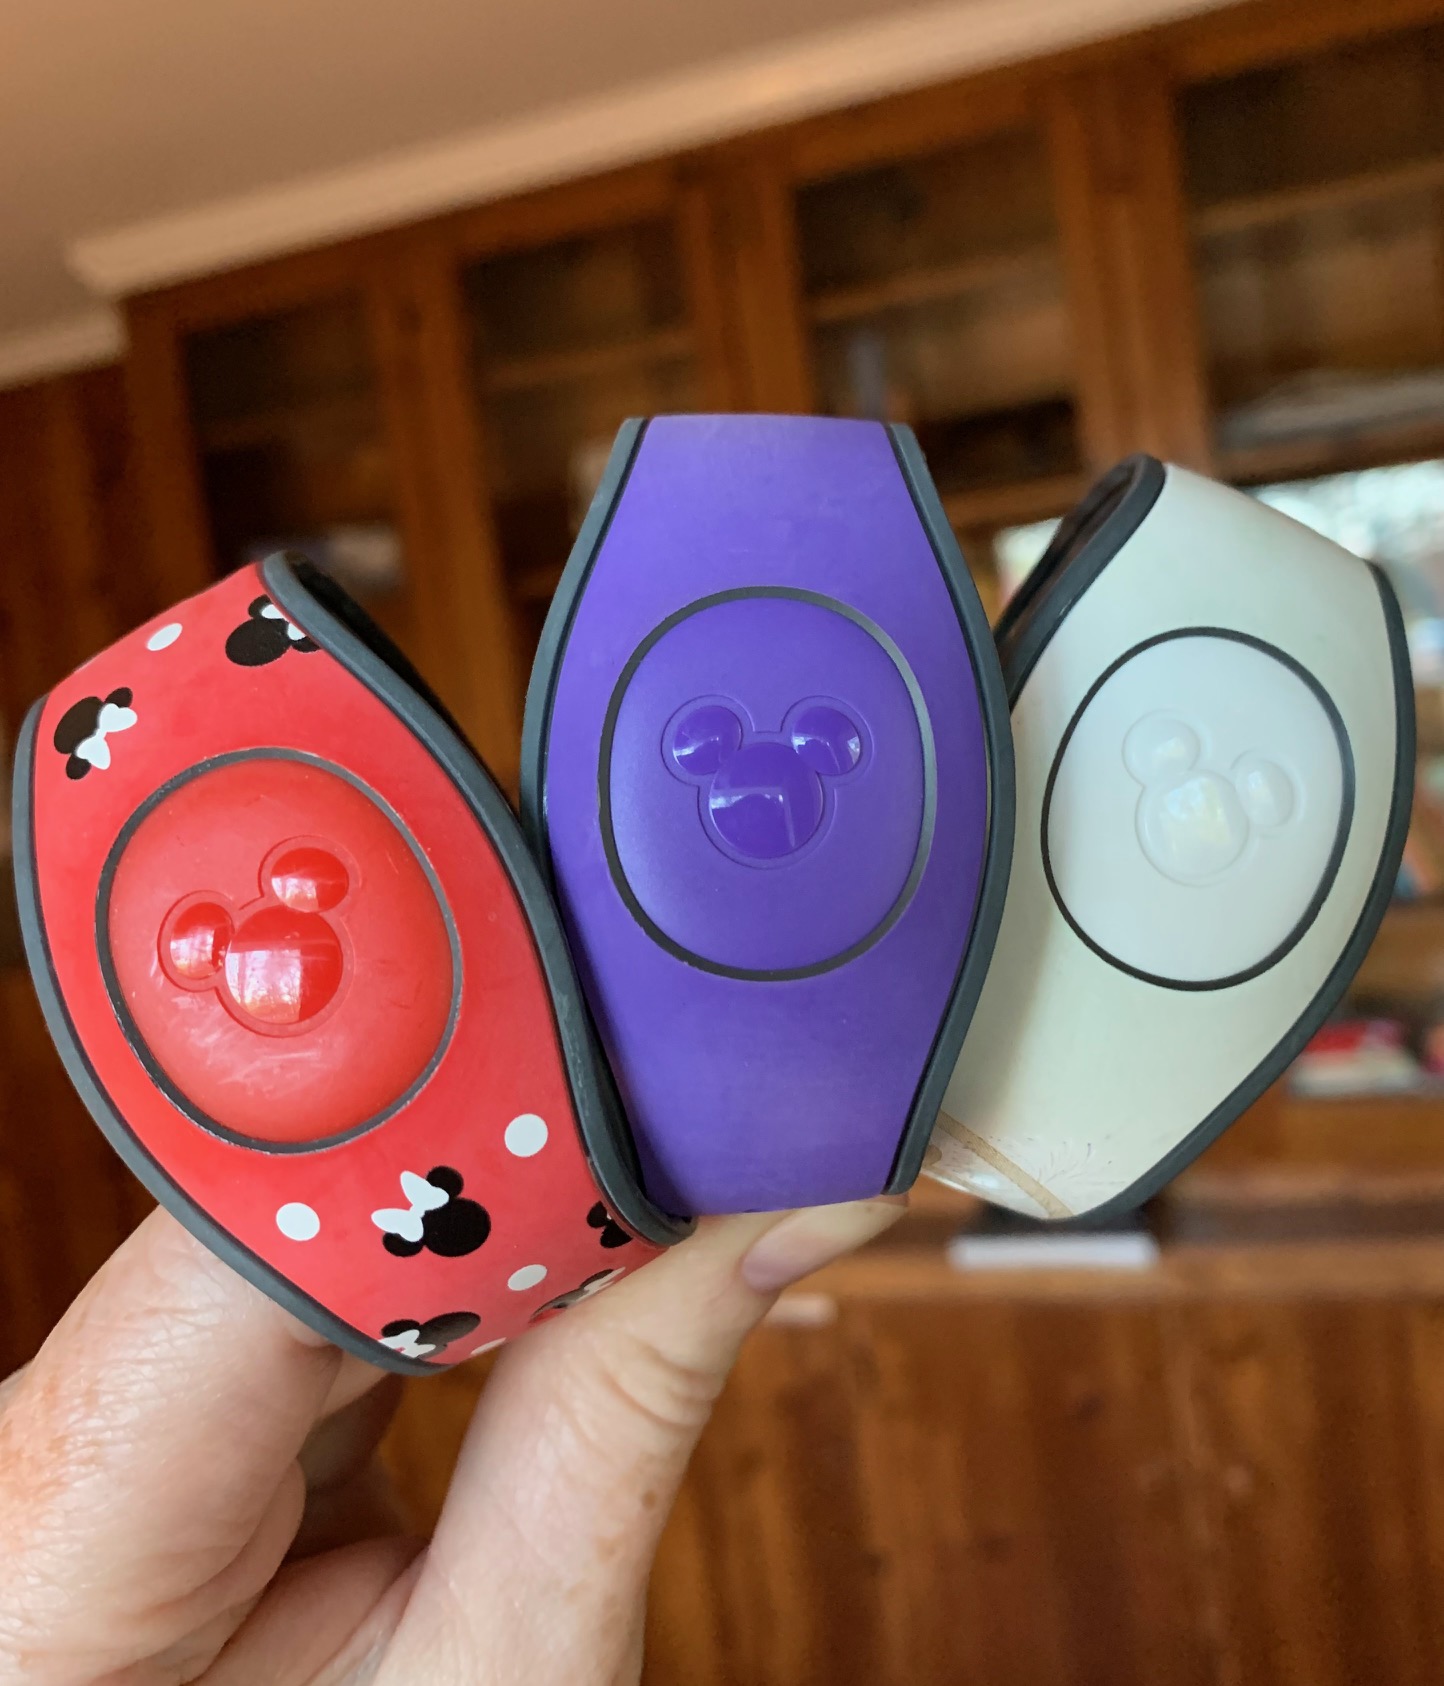 Disney Magic Bands Ultimate Guide - The Frugal South